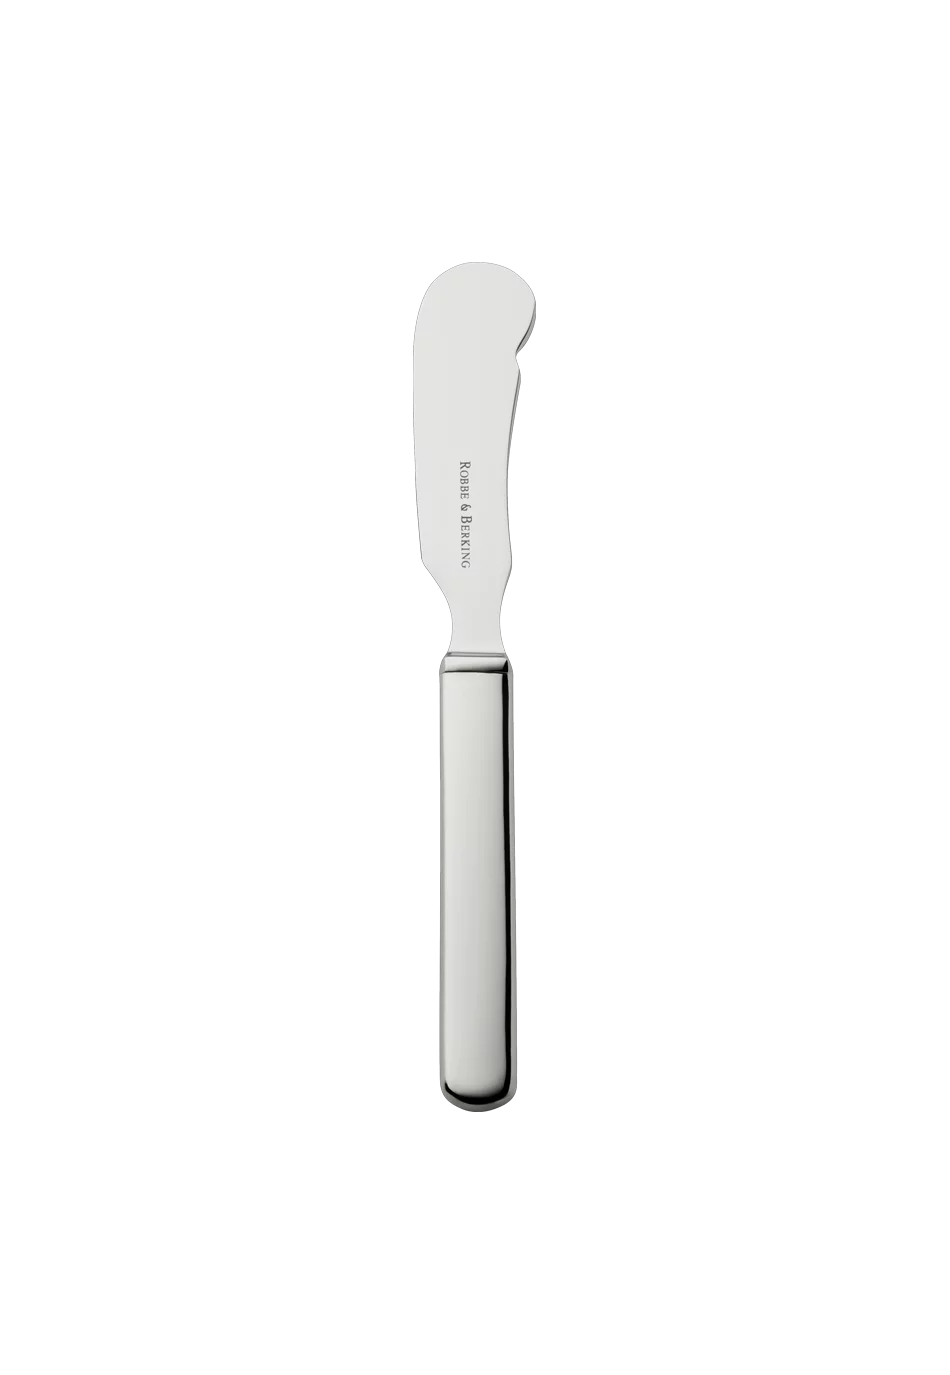 Topos Butter Knife, hollow handle (18/8 stainless steel)